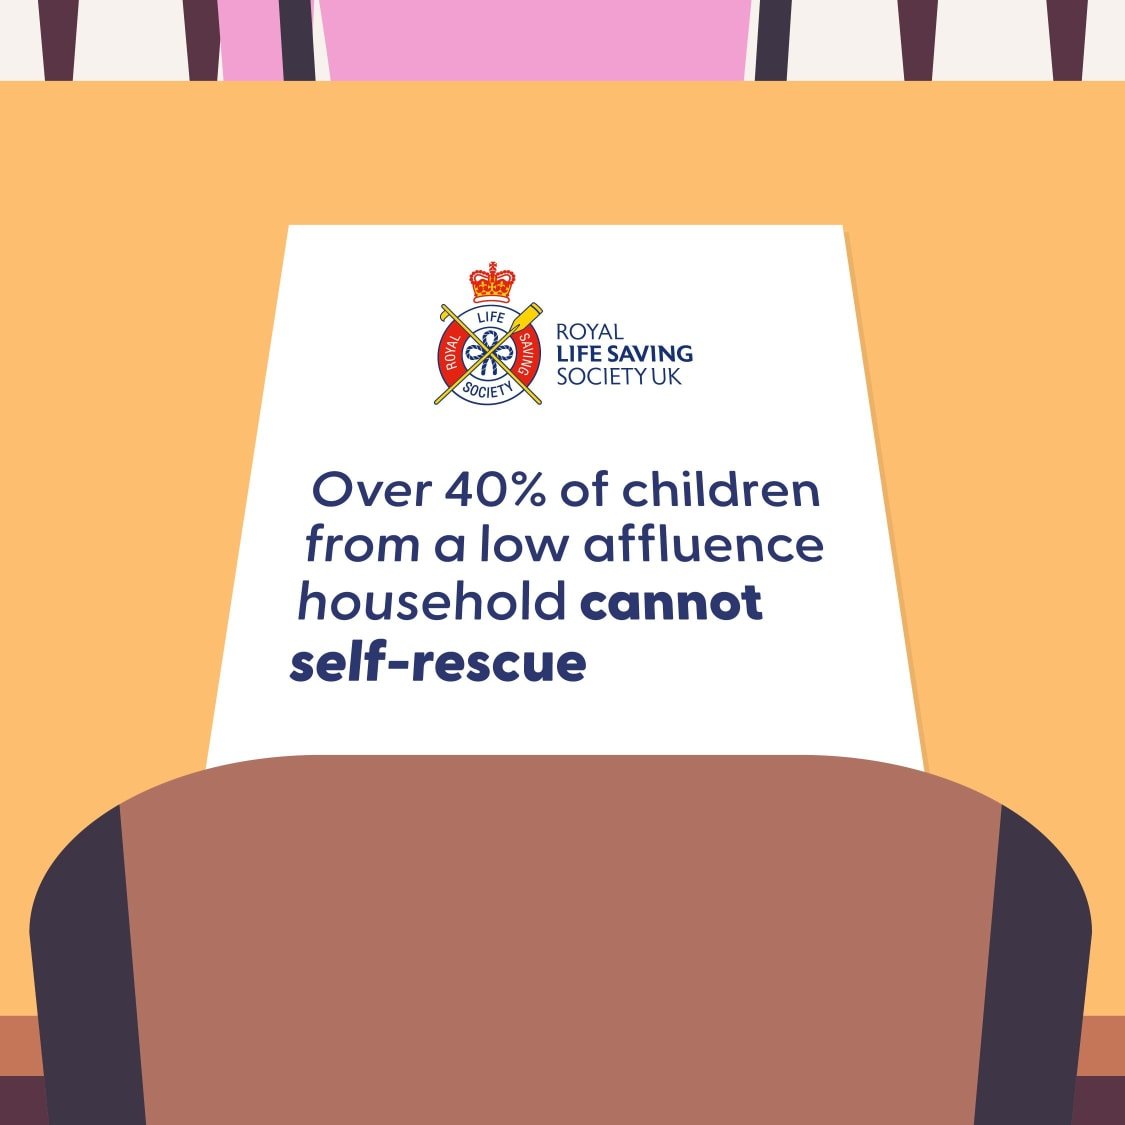 Over 40% of children from low affluence backgrounds cannot self rescue